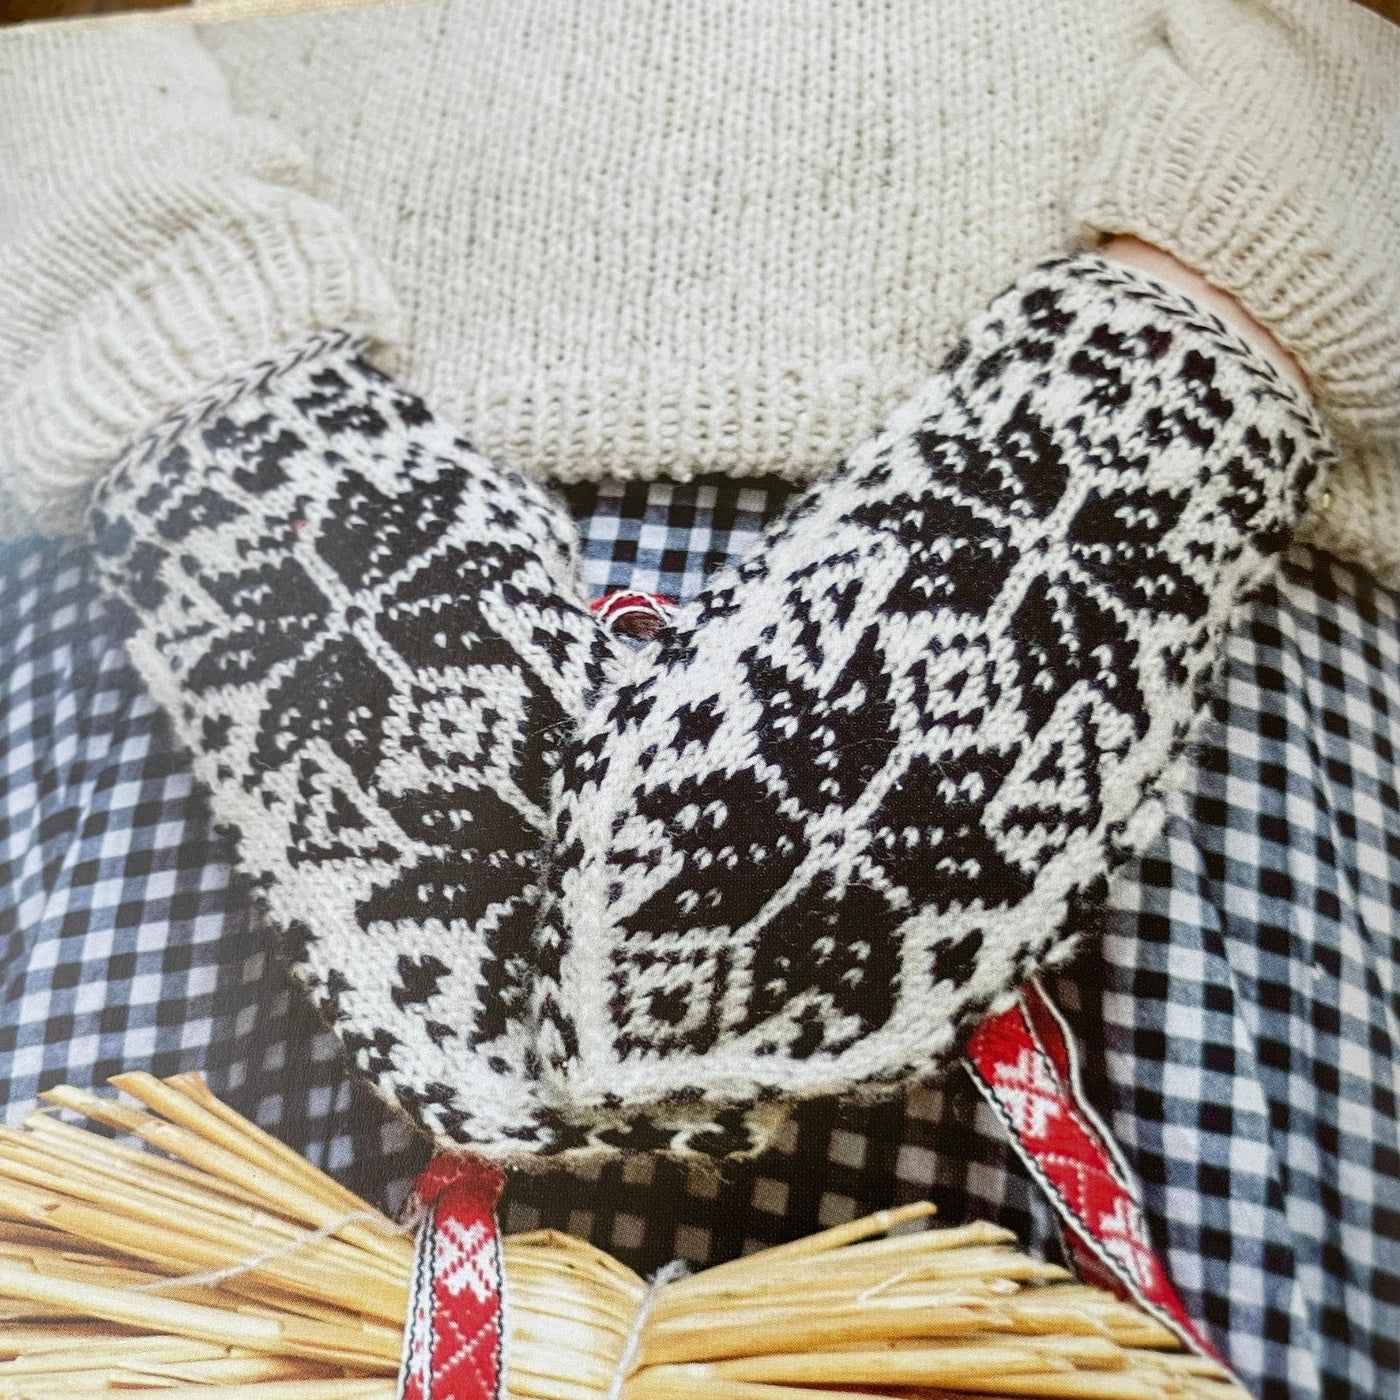 up close of Selbu Mittens knit in black and white, from Nordic Knitting Primer